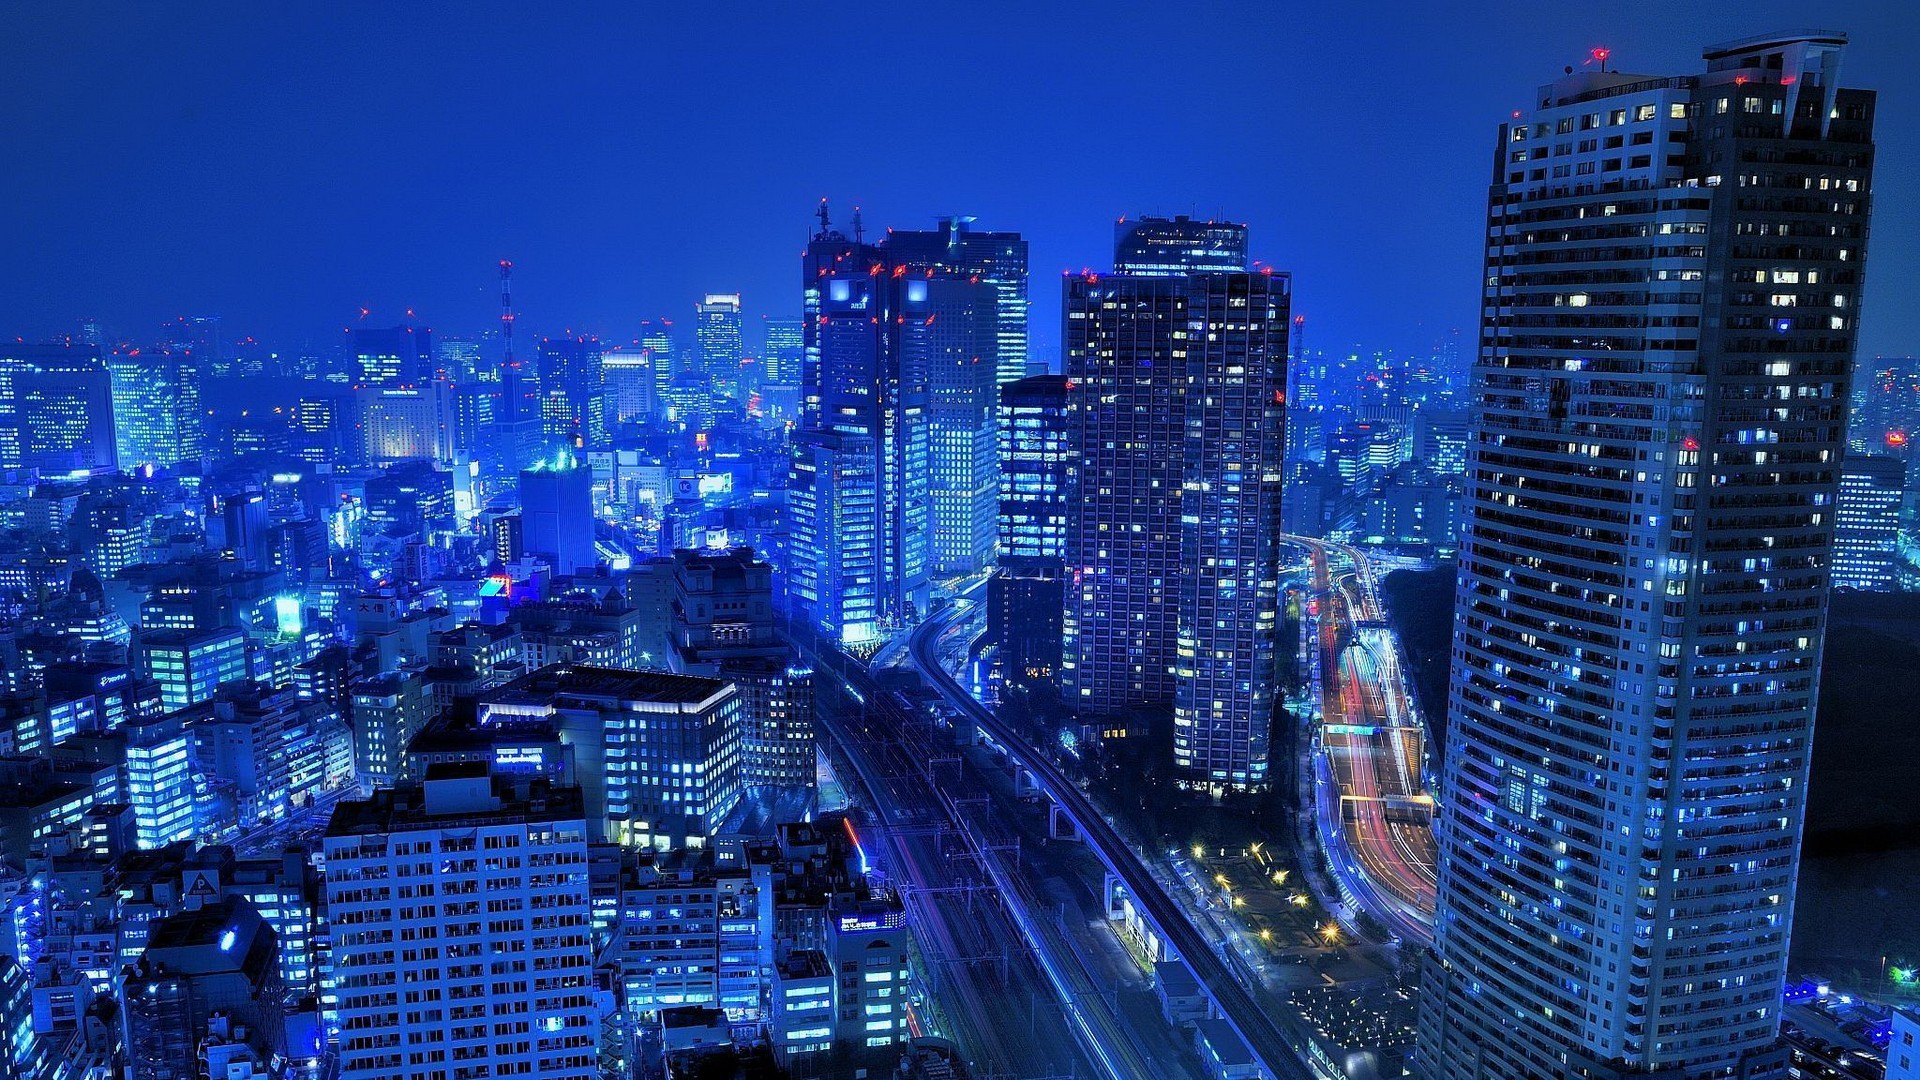 Skyscrapers: Blue City Asia Japan Tokyo Night Image for HD 16:9 High ...